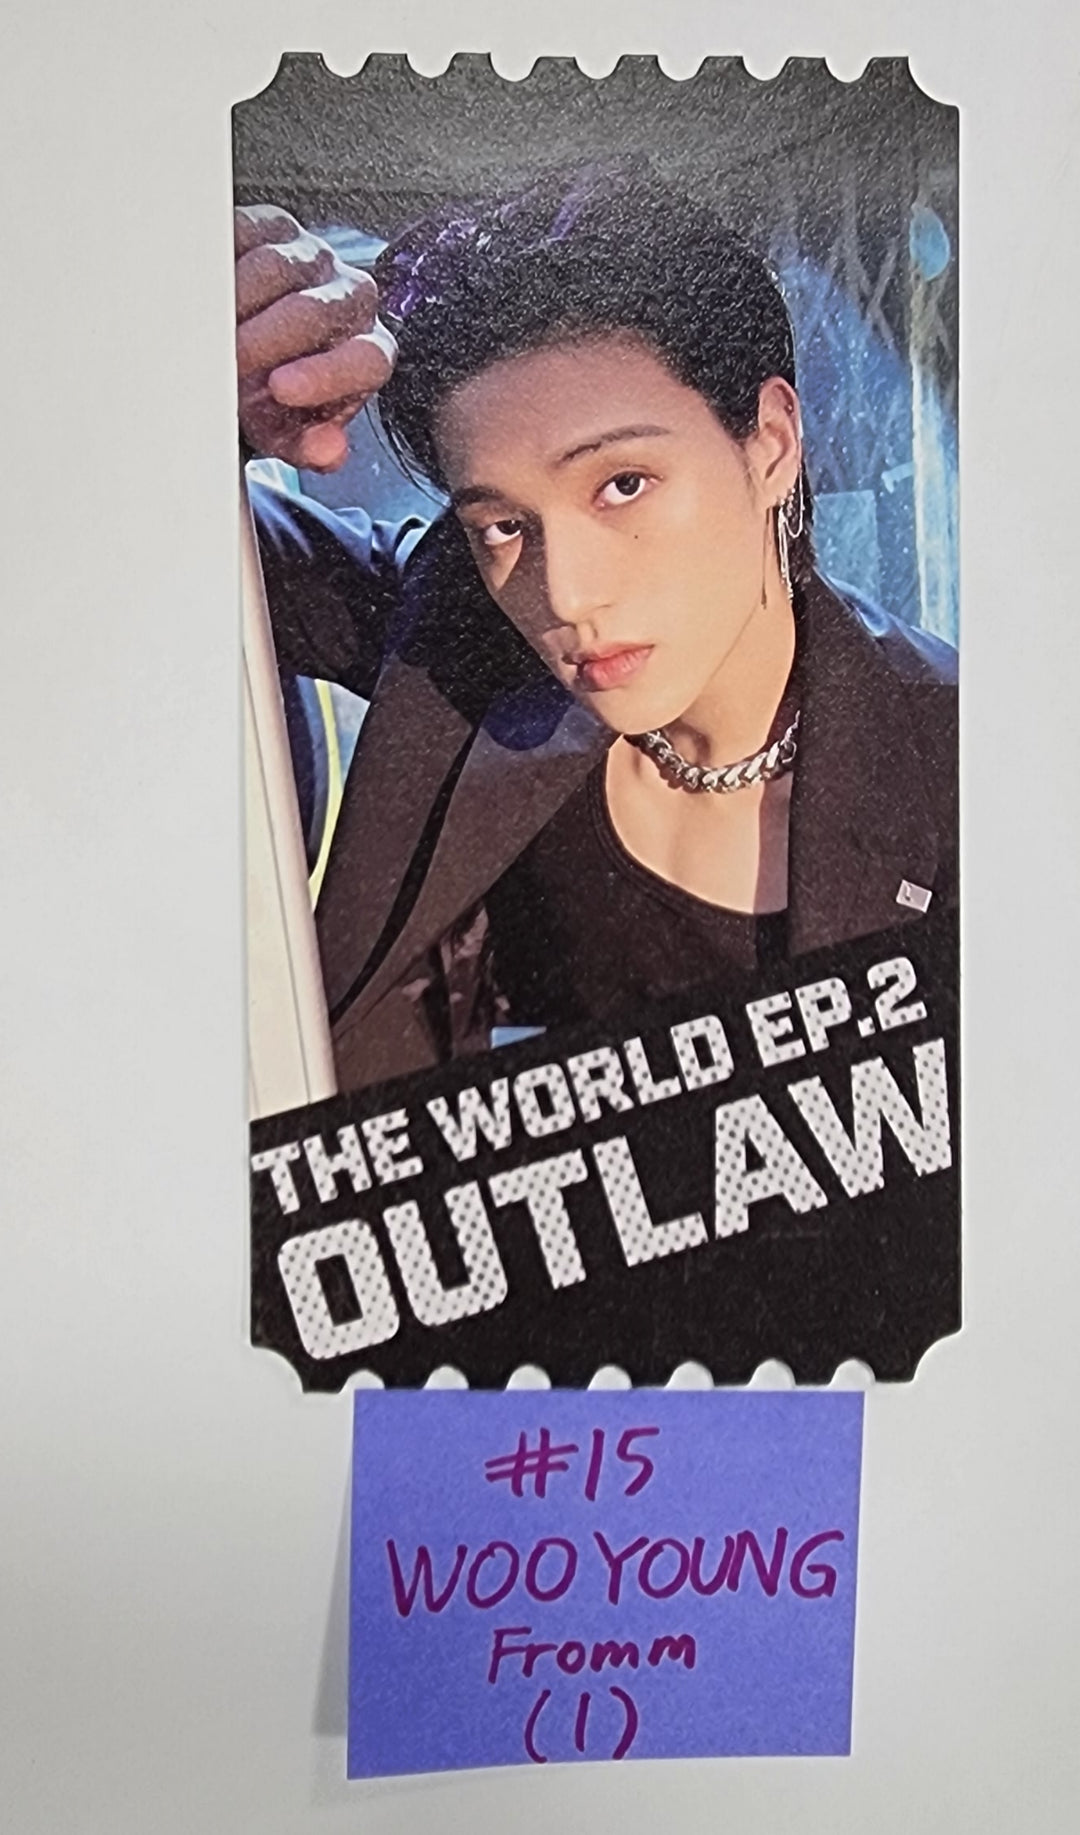 ATEEZ "THE WORLD EP.2 " - Fromm Pre-Order Benefit Photocard, Ticket